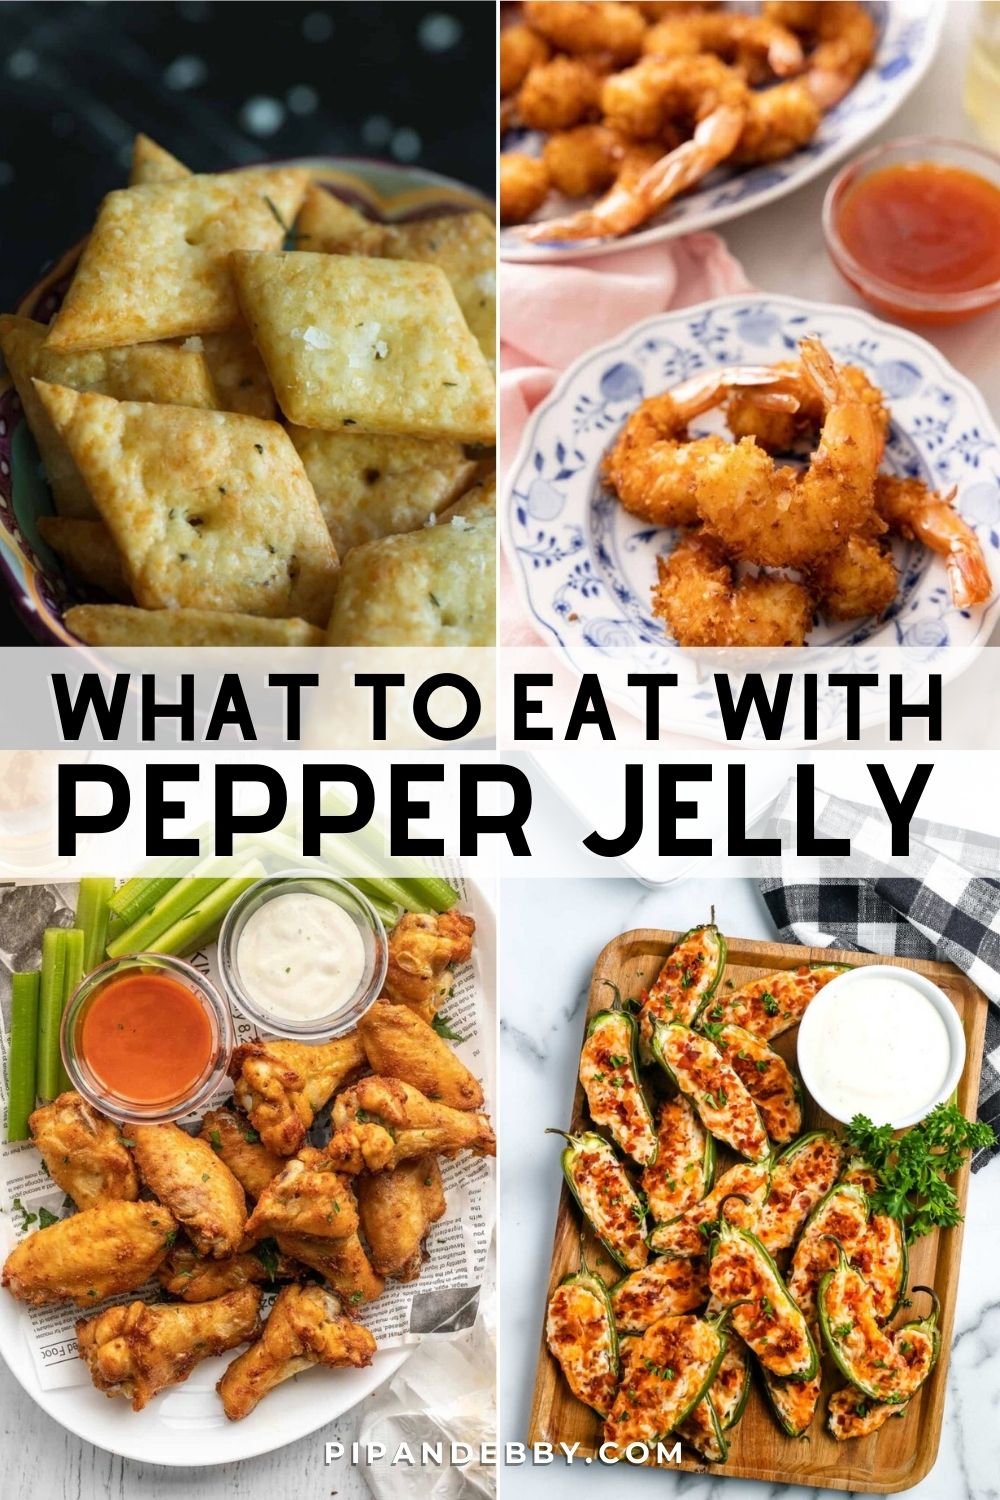 Four food photos with text overlay reading, "What to eat with pepper jelly."